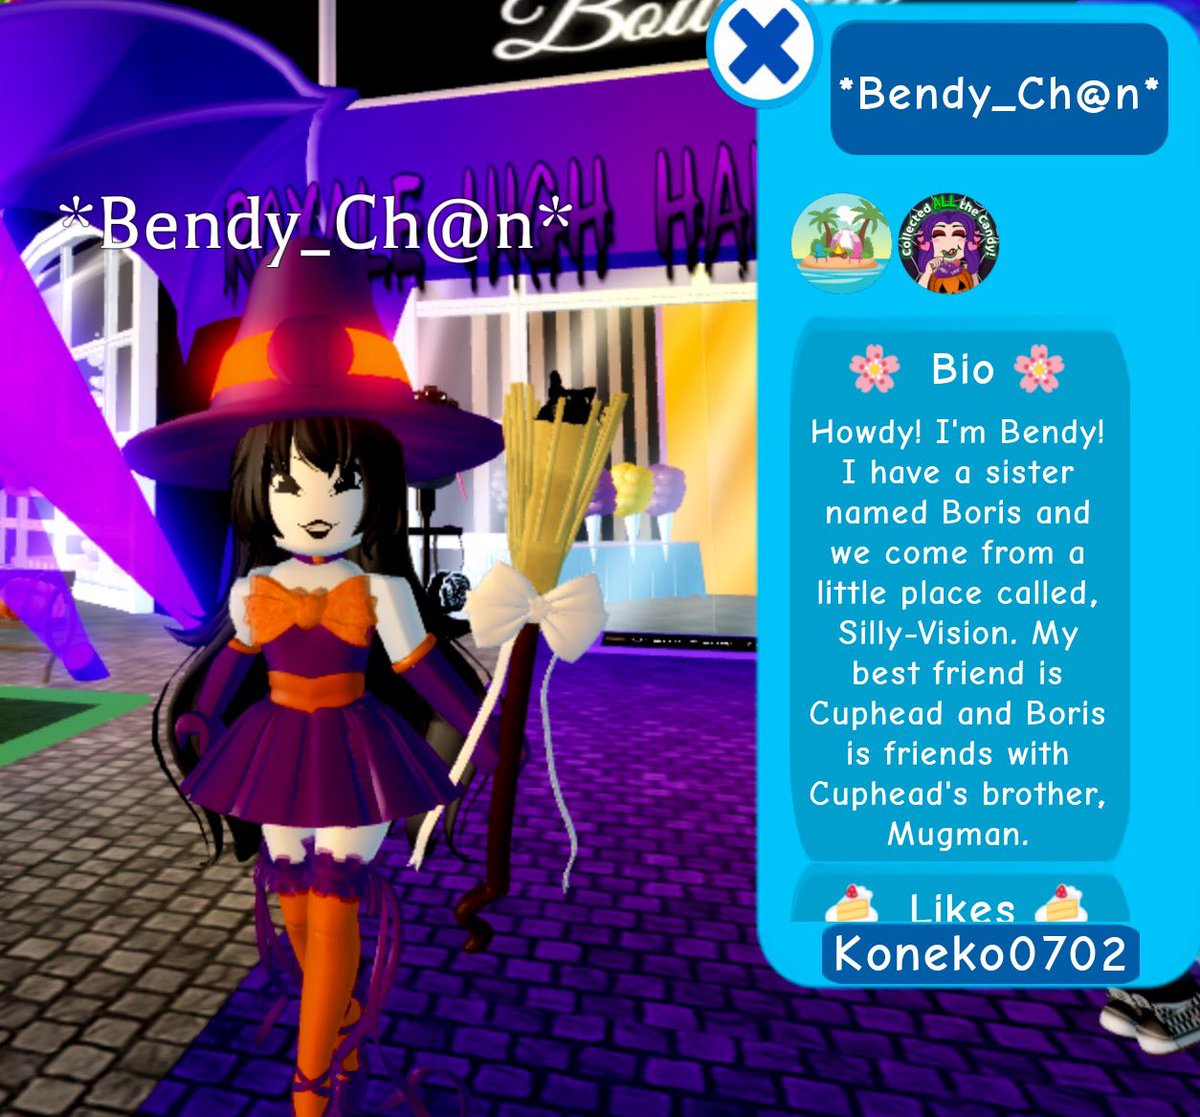 Bendy Chan On Twitter Finally Finished Every Single Homestore In The Halloween Event Some Stores Were Kind Of Difficult When Looking For Candies But I Had A Lot Of Fun Also Big Thanks - roblox halloween event 2019 candy hunt